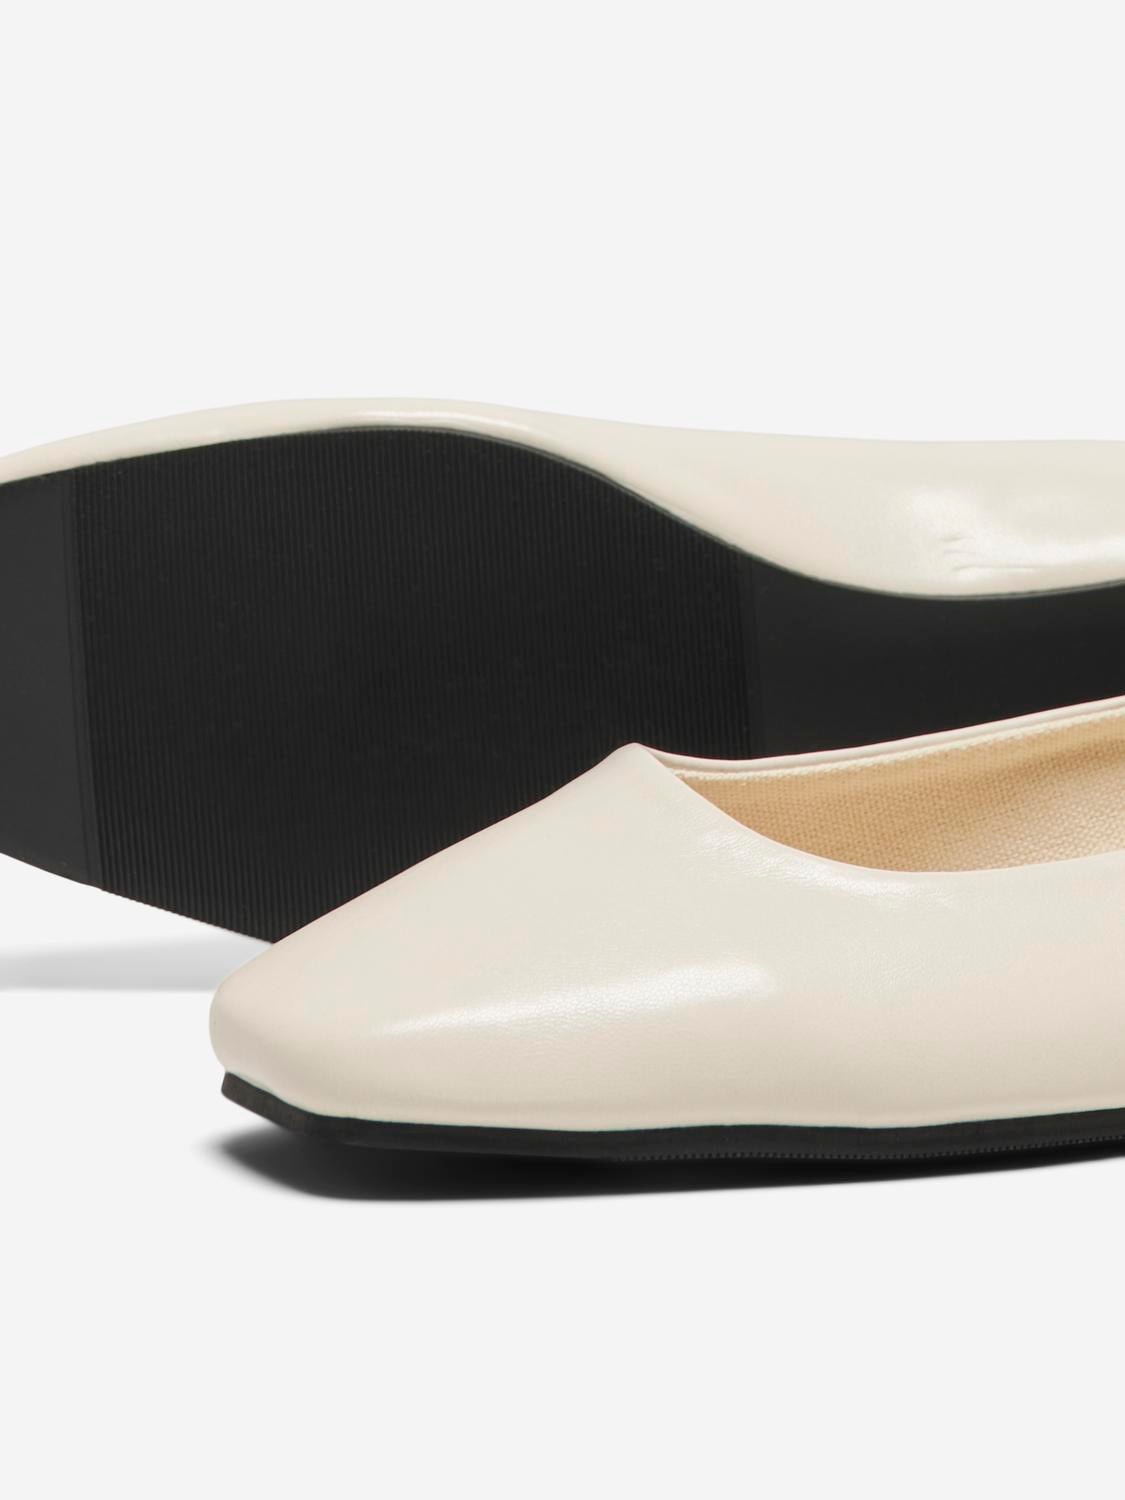 ONLY Square toe Ballerina -Creme - 15320198